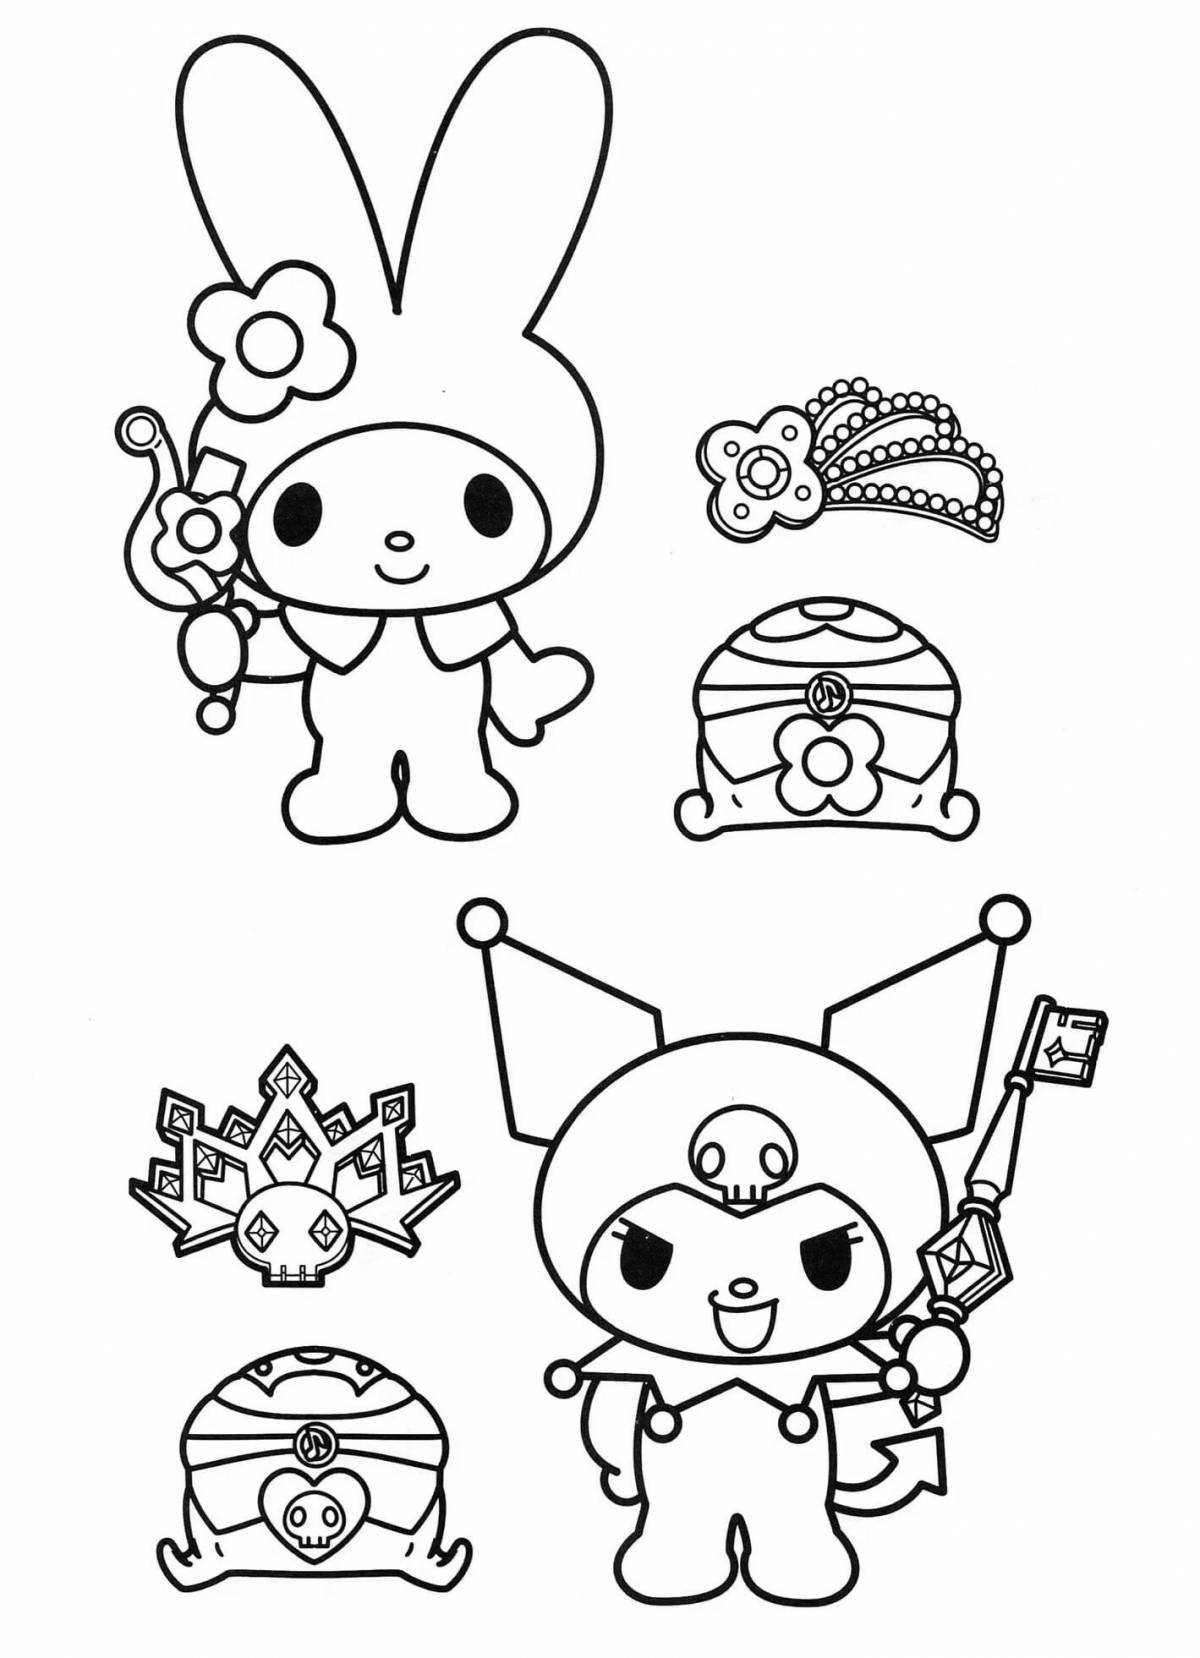 Funny May melody hello kitty coloring page